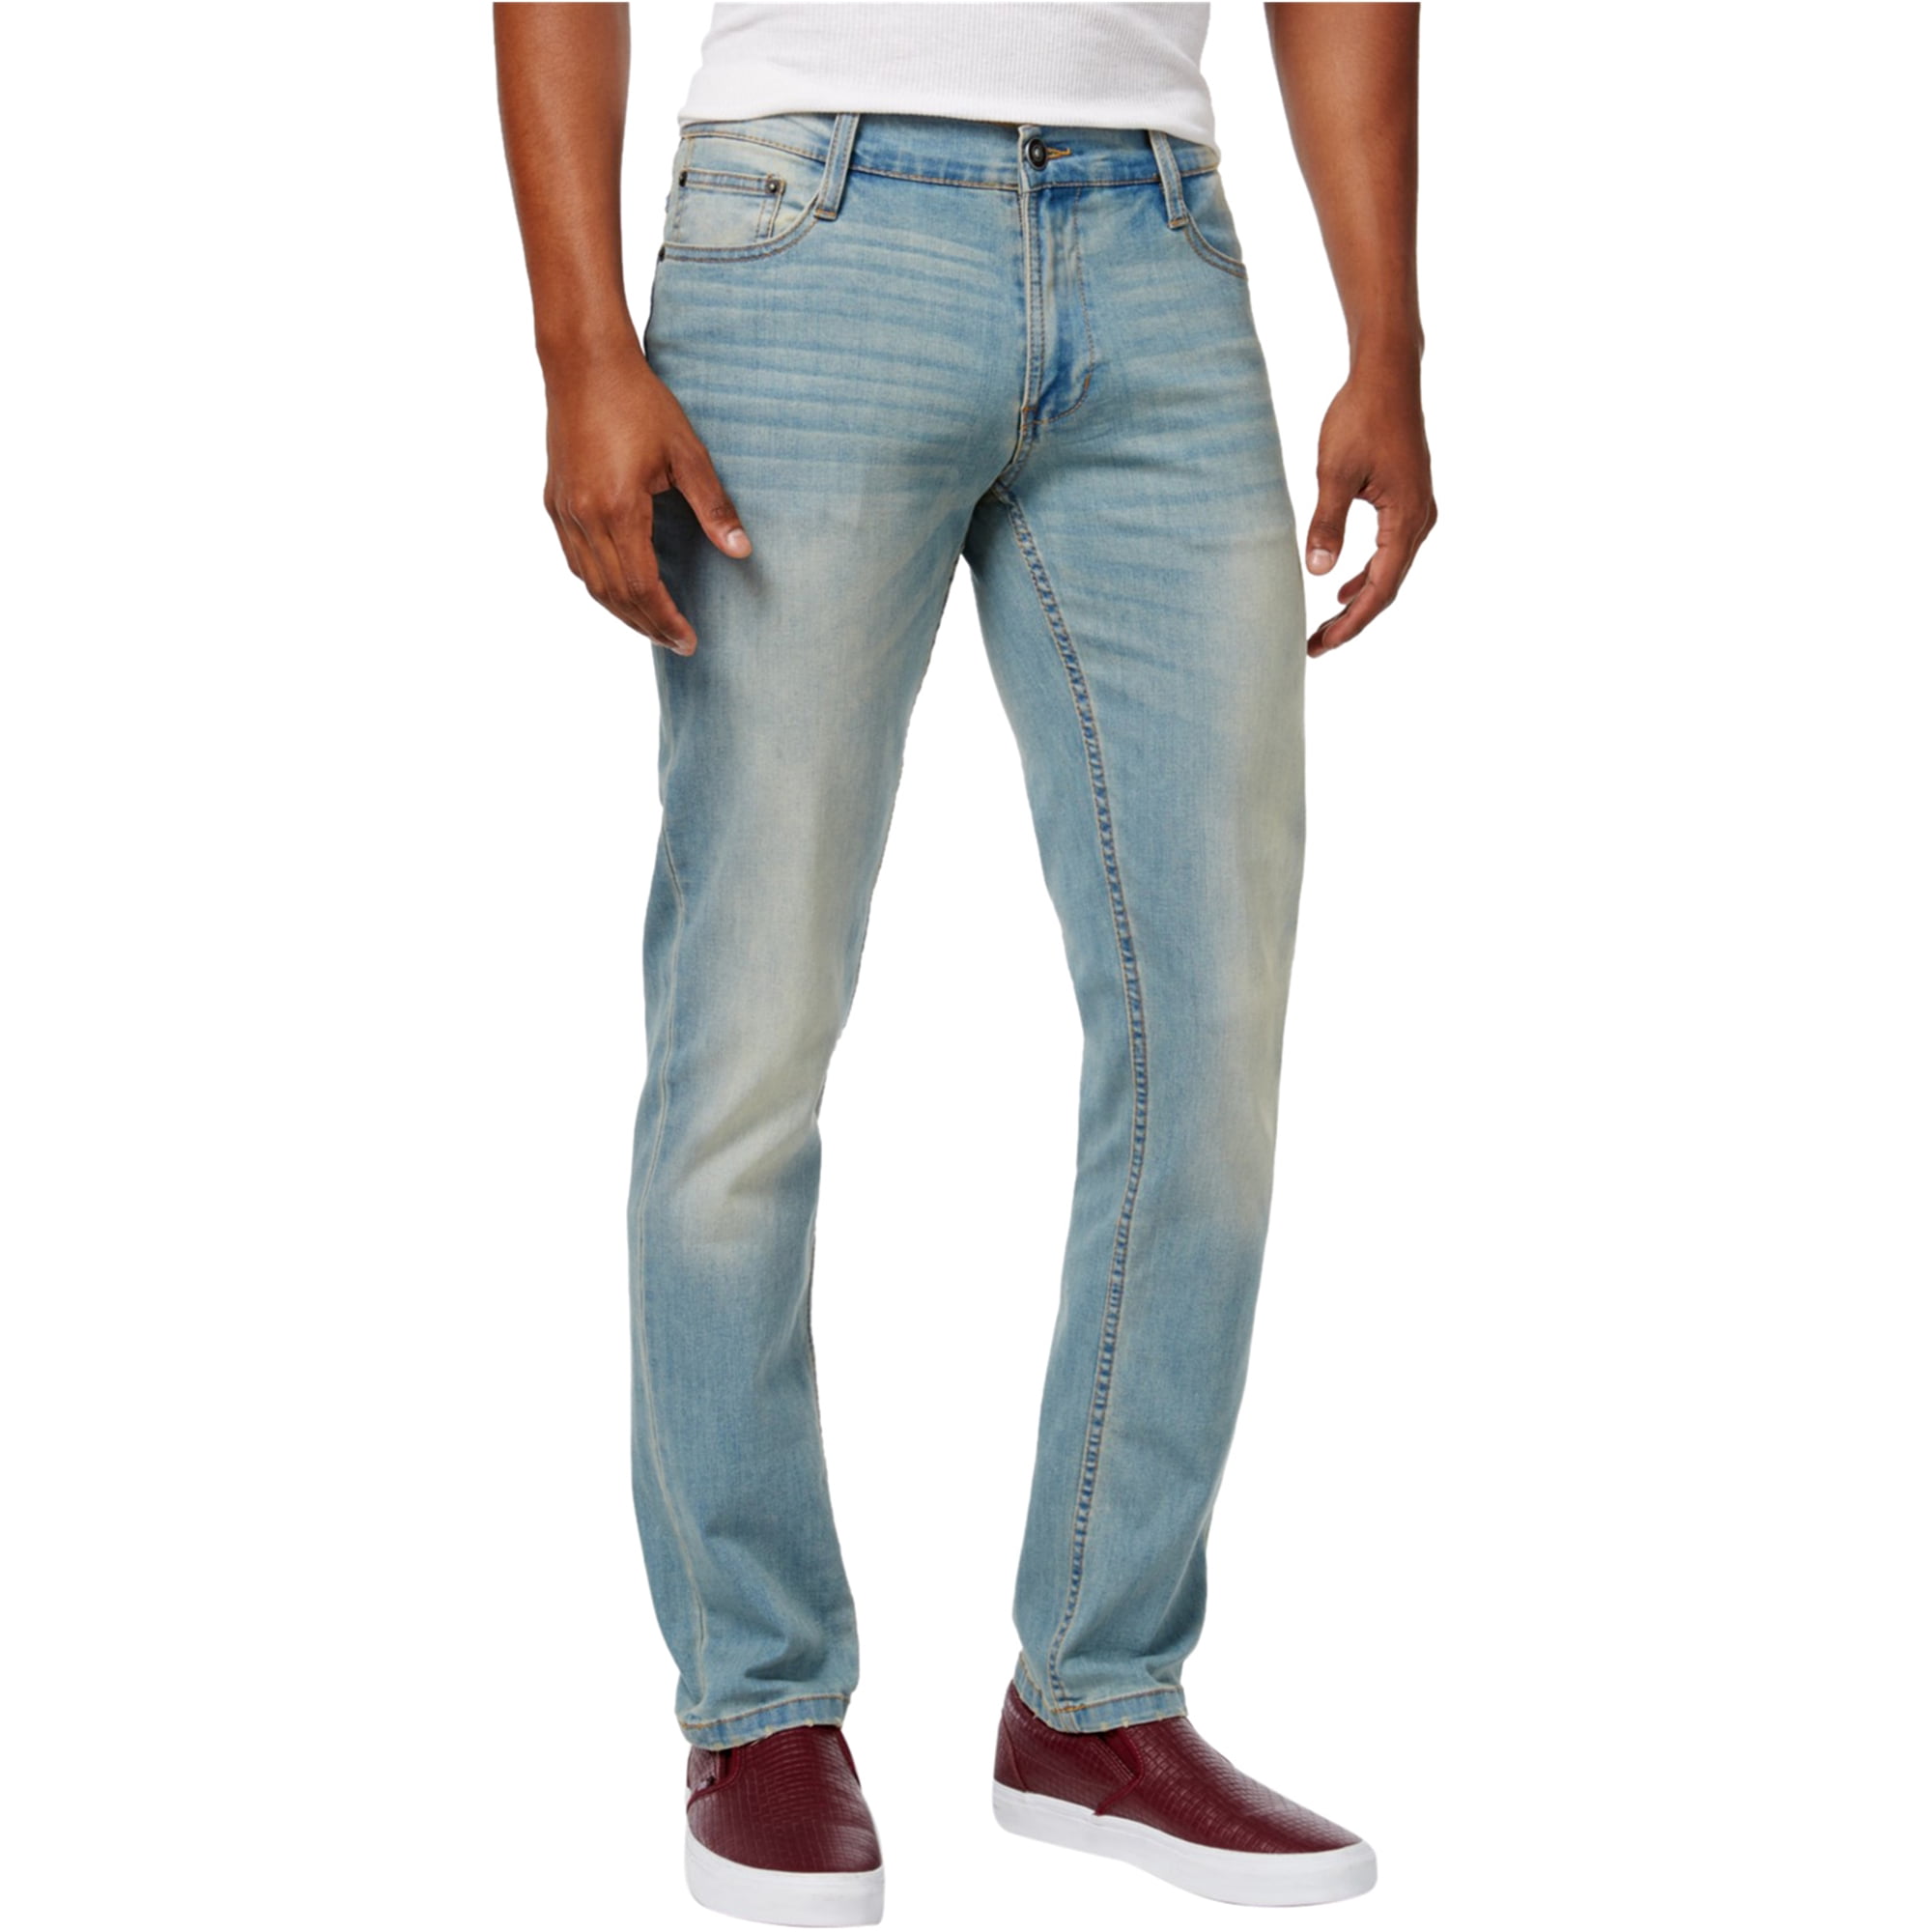 ring of fire brand jeans